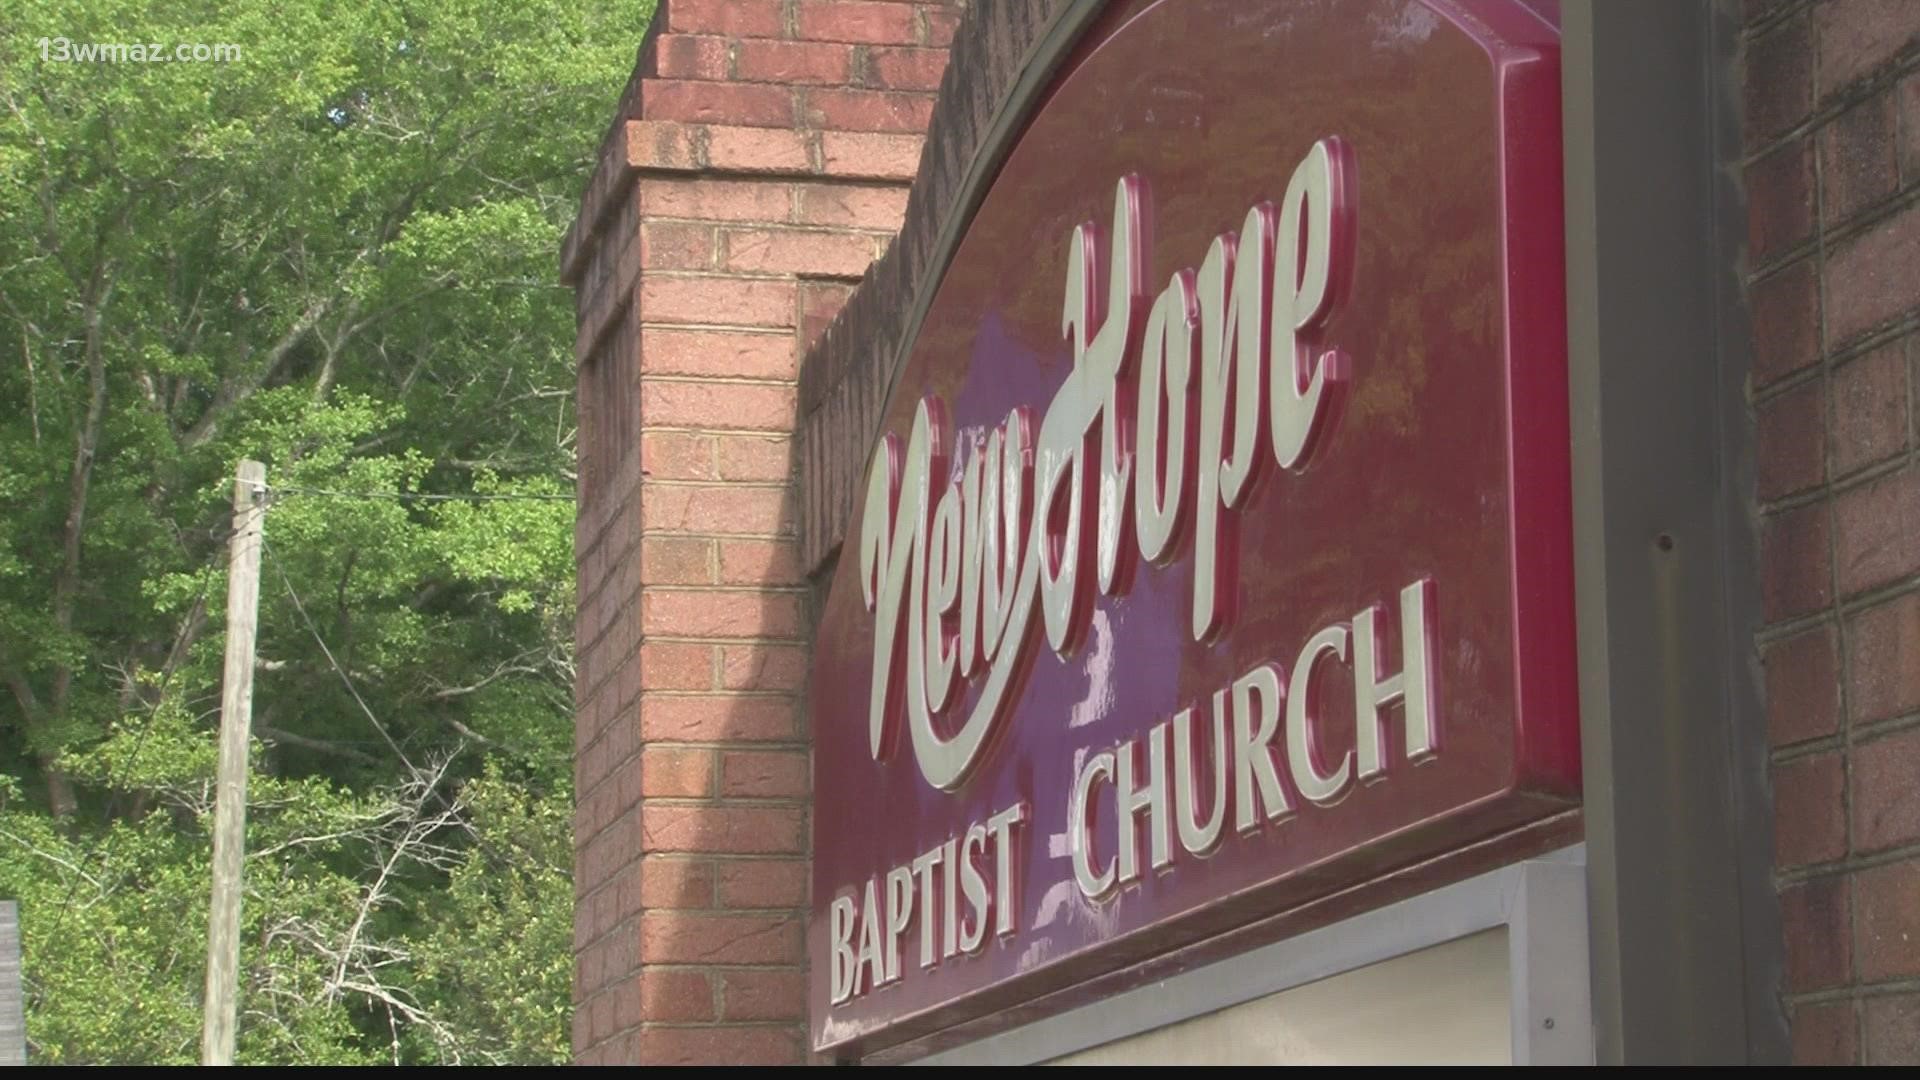 Some Macon church leaders want to restart a program aimed at curbing violence in the city.